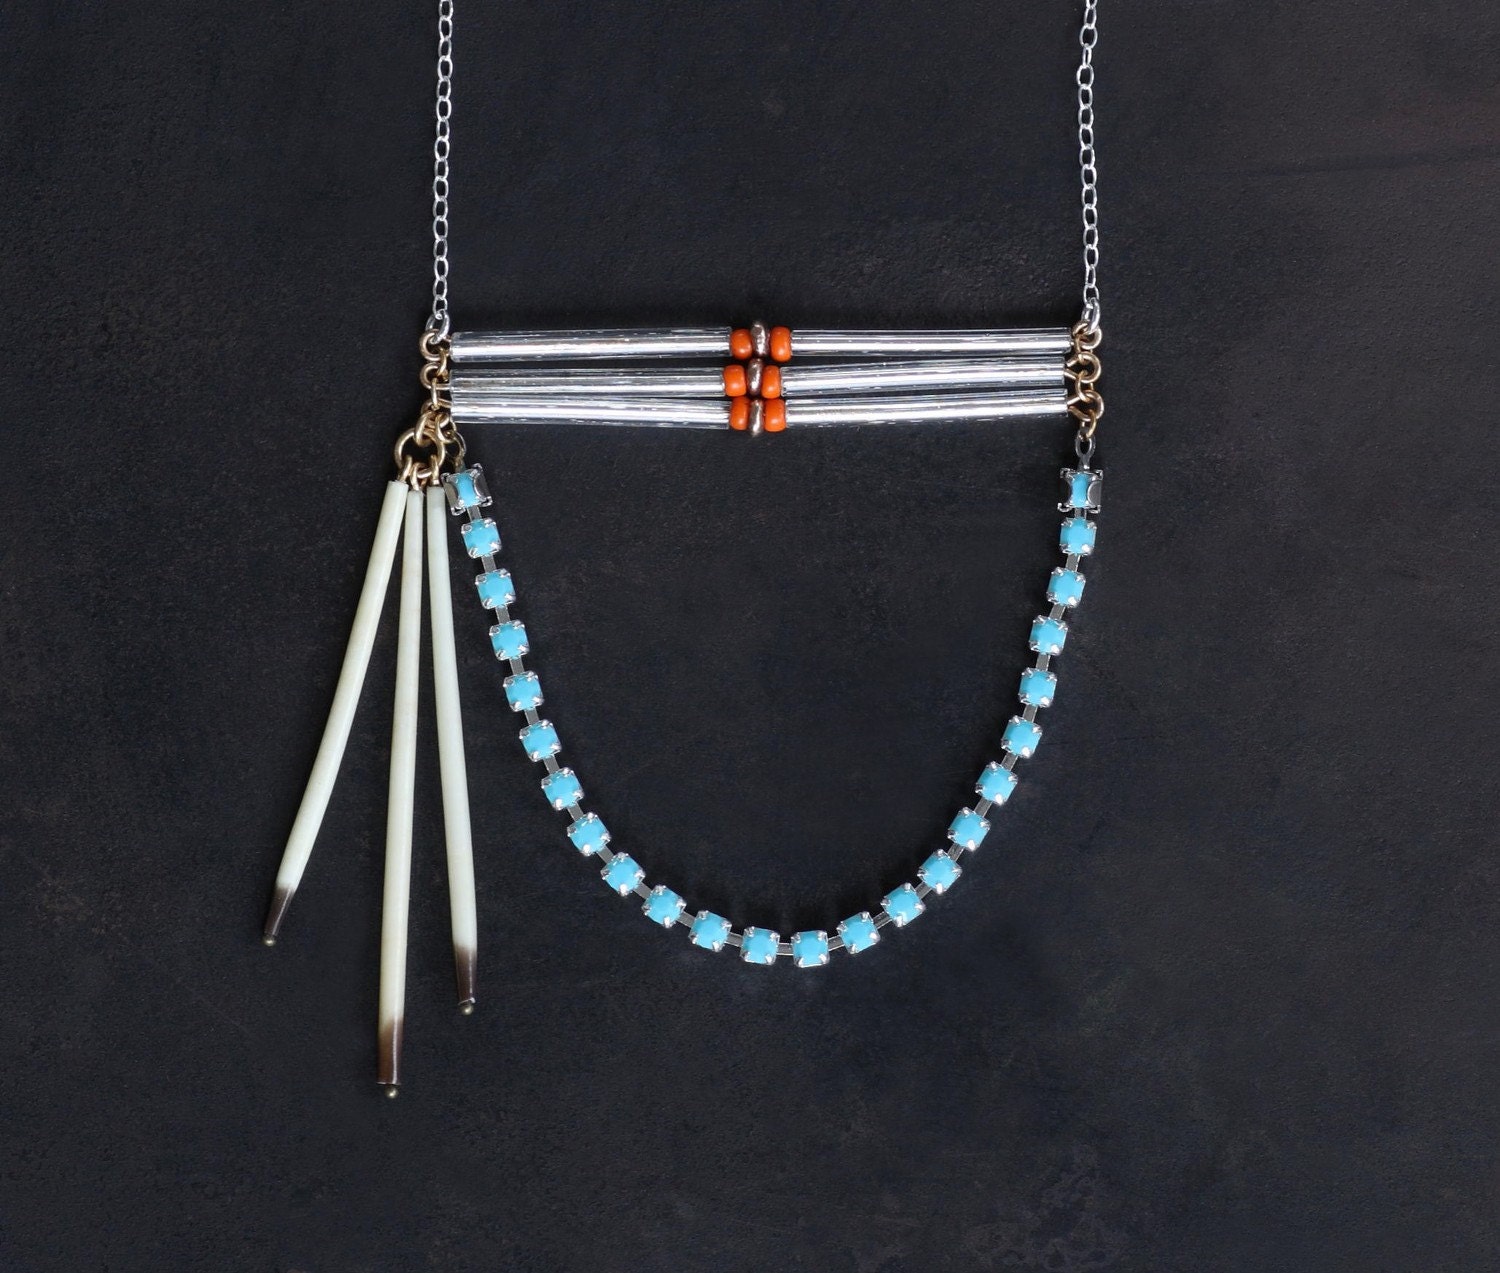 Cheyenne I - Porcupine Quill and Turquoise Rhinestone Urban Pioneer Necklace by Prairieoats - prairieoats